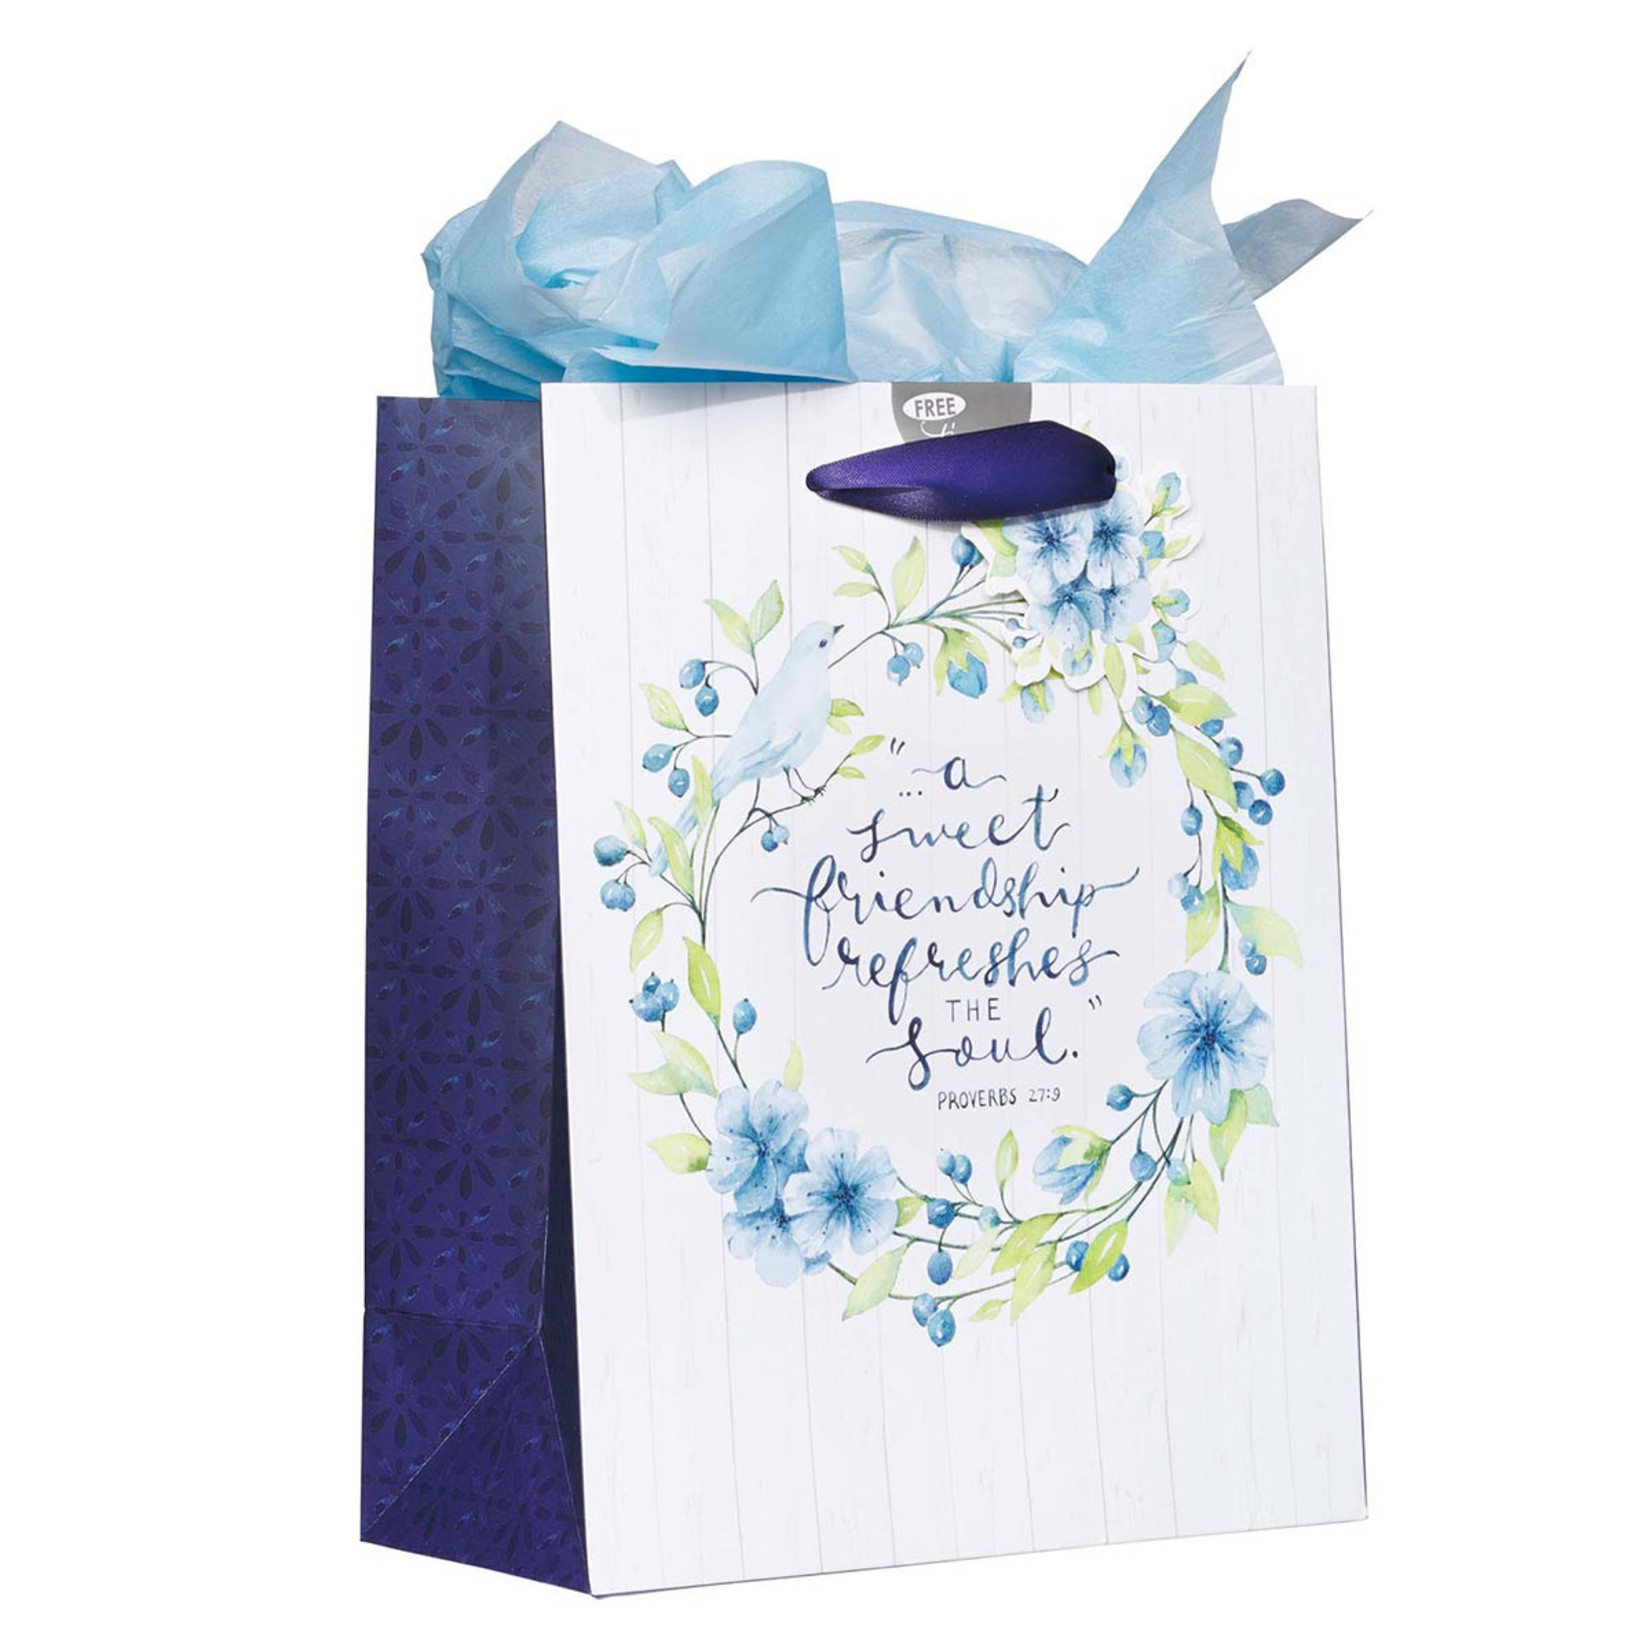 Christian Art Gifts A Sweet friendship Medium Gift Bag in White and Blue with Tissue Paper - Proverbs 27:9